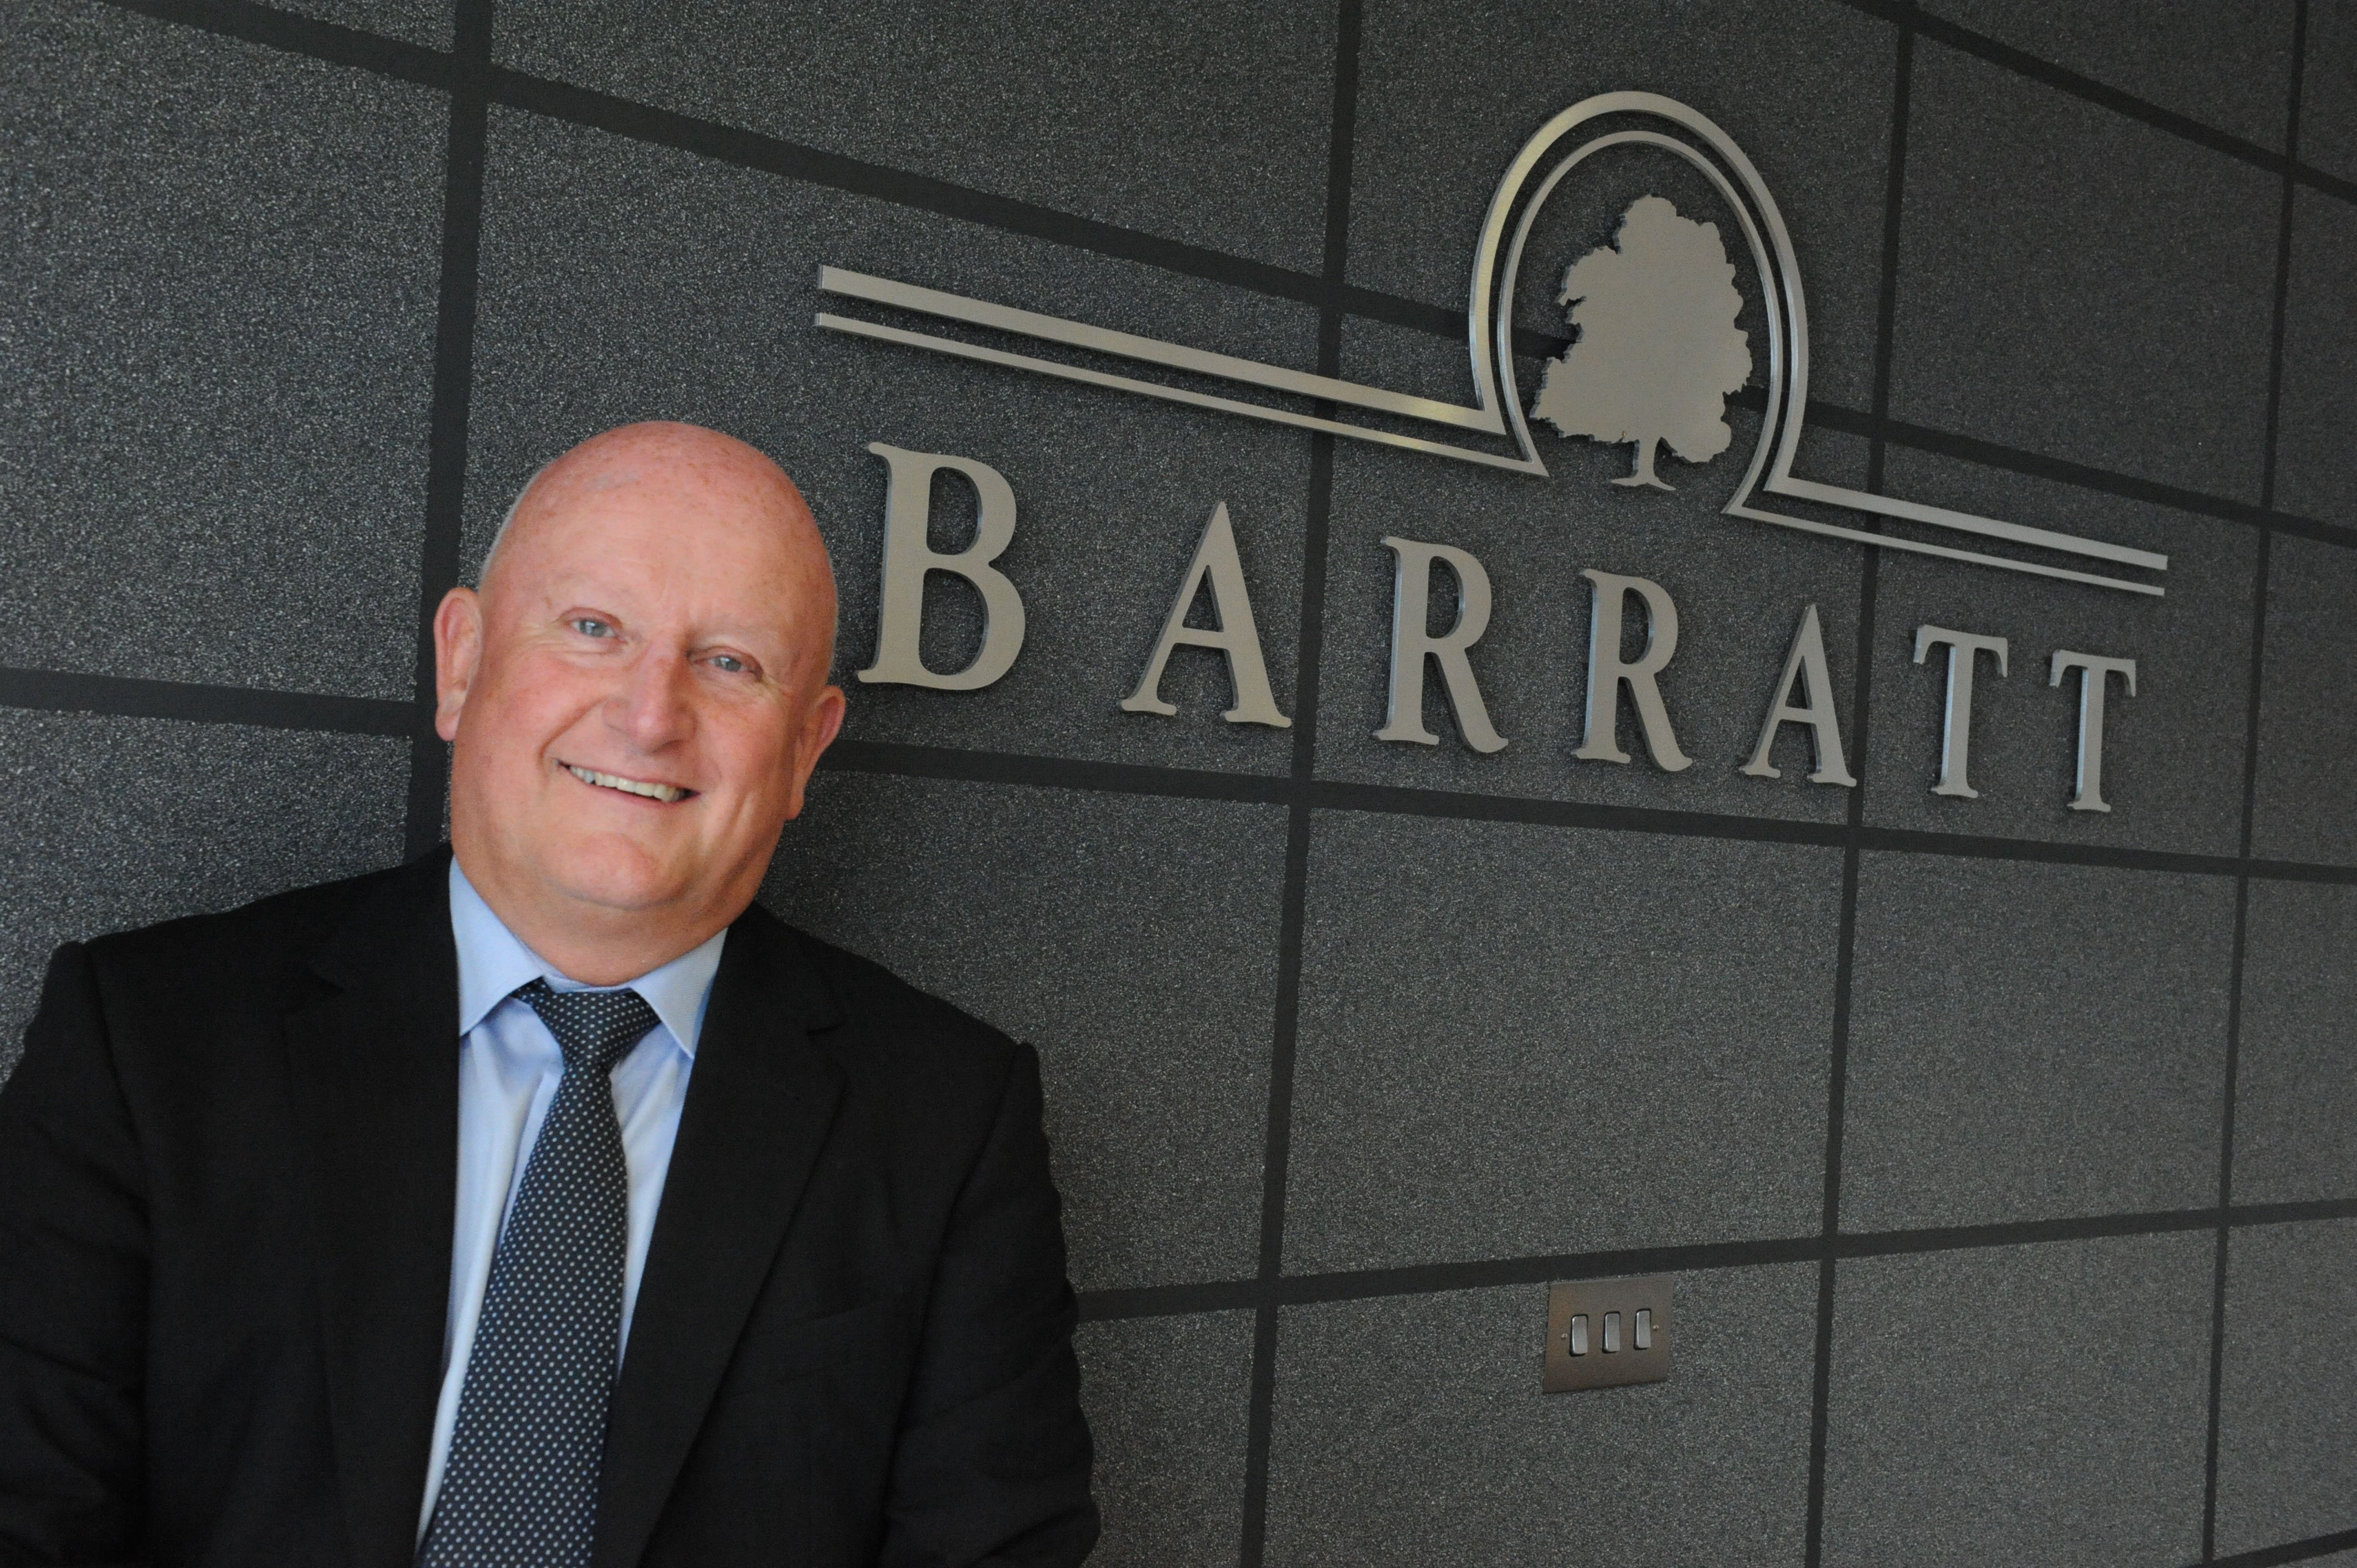 Barratt Scotland plans to deliver more than 3,800 homes across 20 new sites